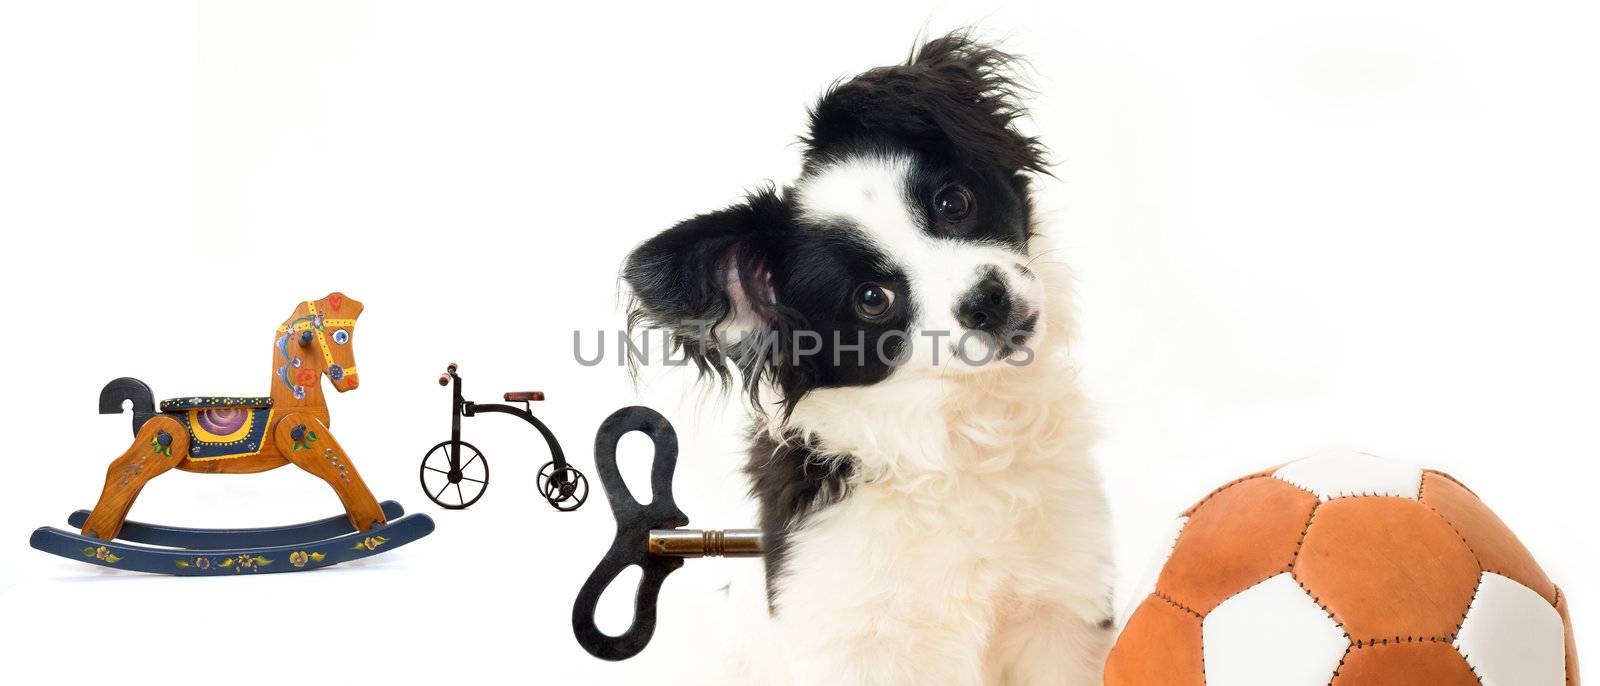 not to abandoned dogs, photo concept, puppy and toys